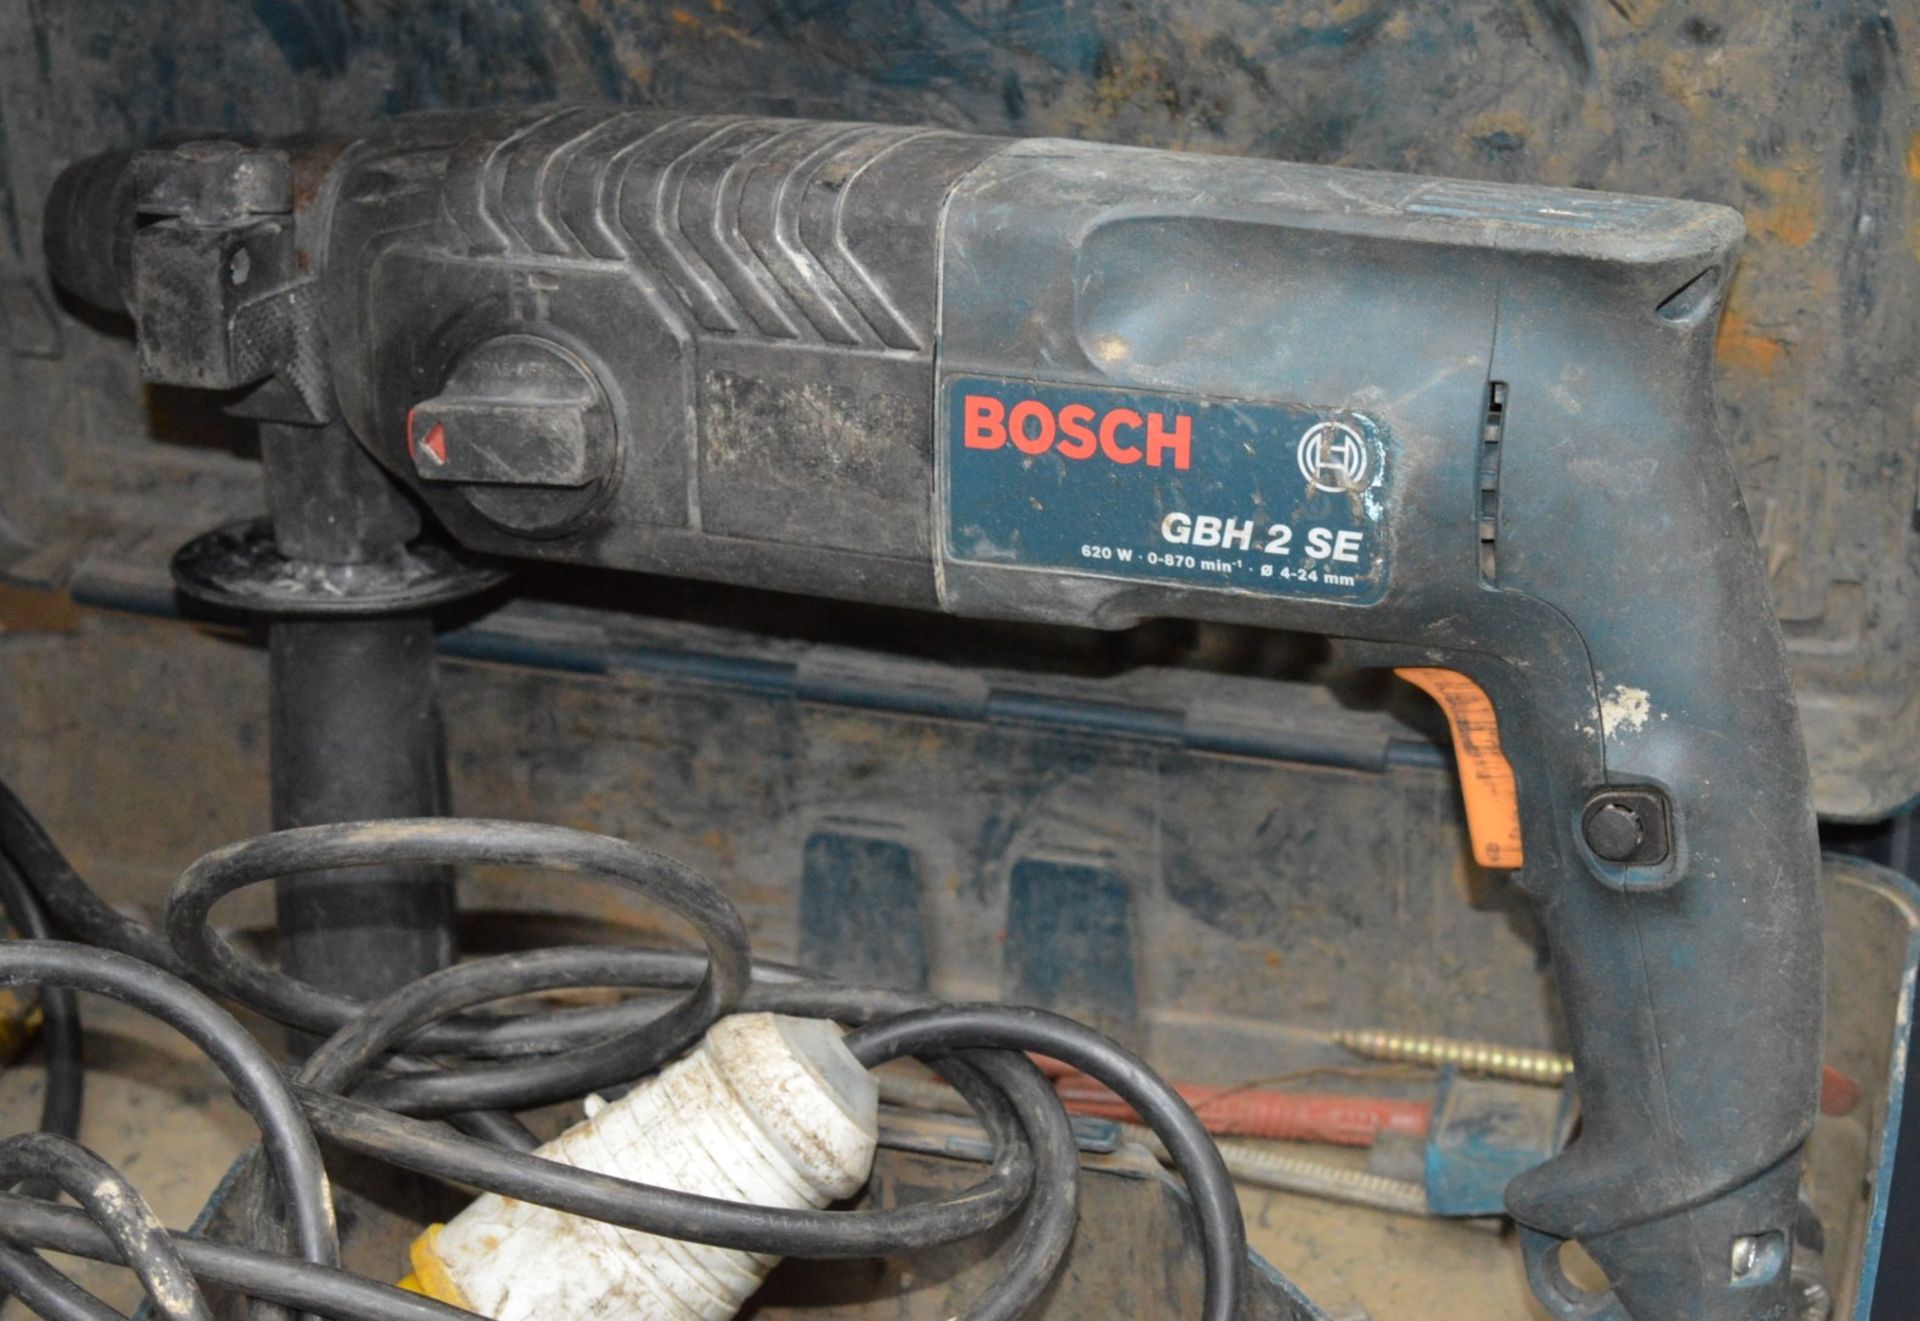 1 x Bosch Rotary Hammer Drill - 110v - Model GBH 2 SE - Includes Protective Case - Tested and - Image 2 of 3